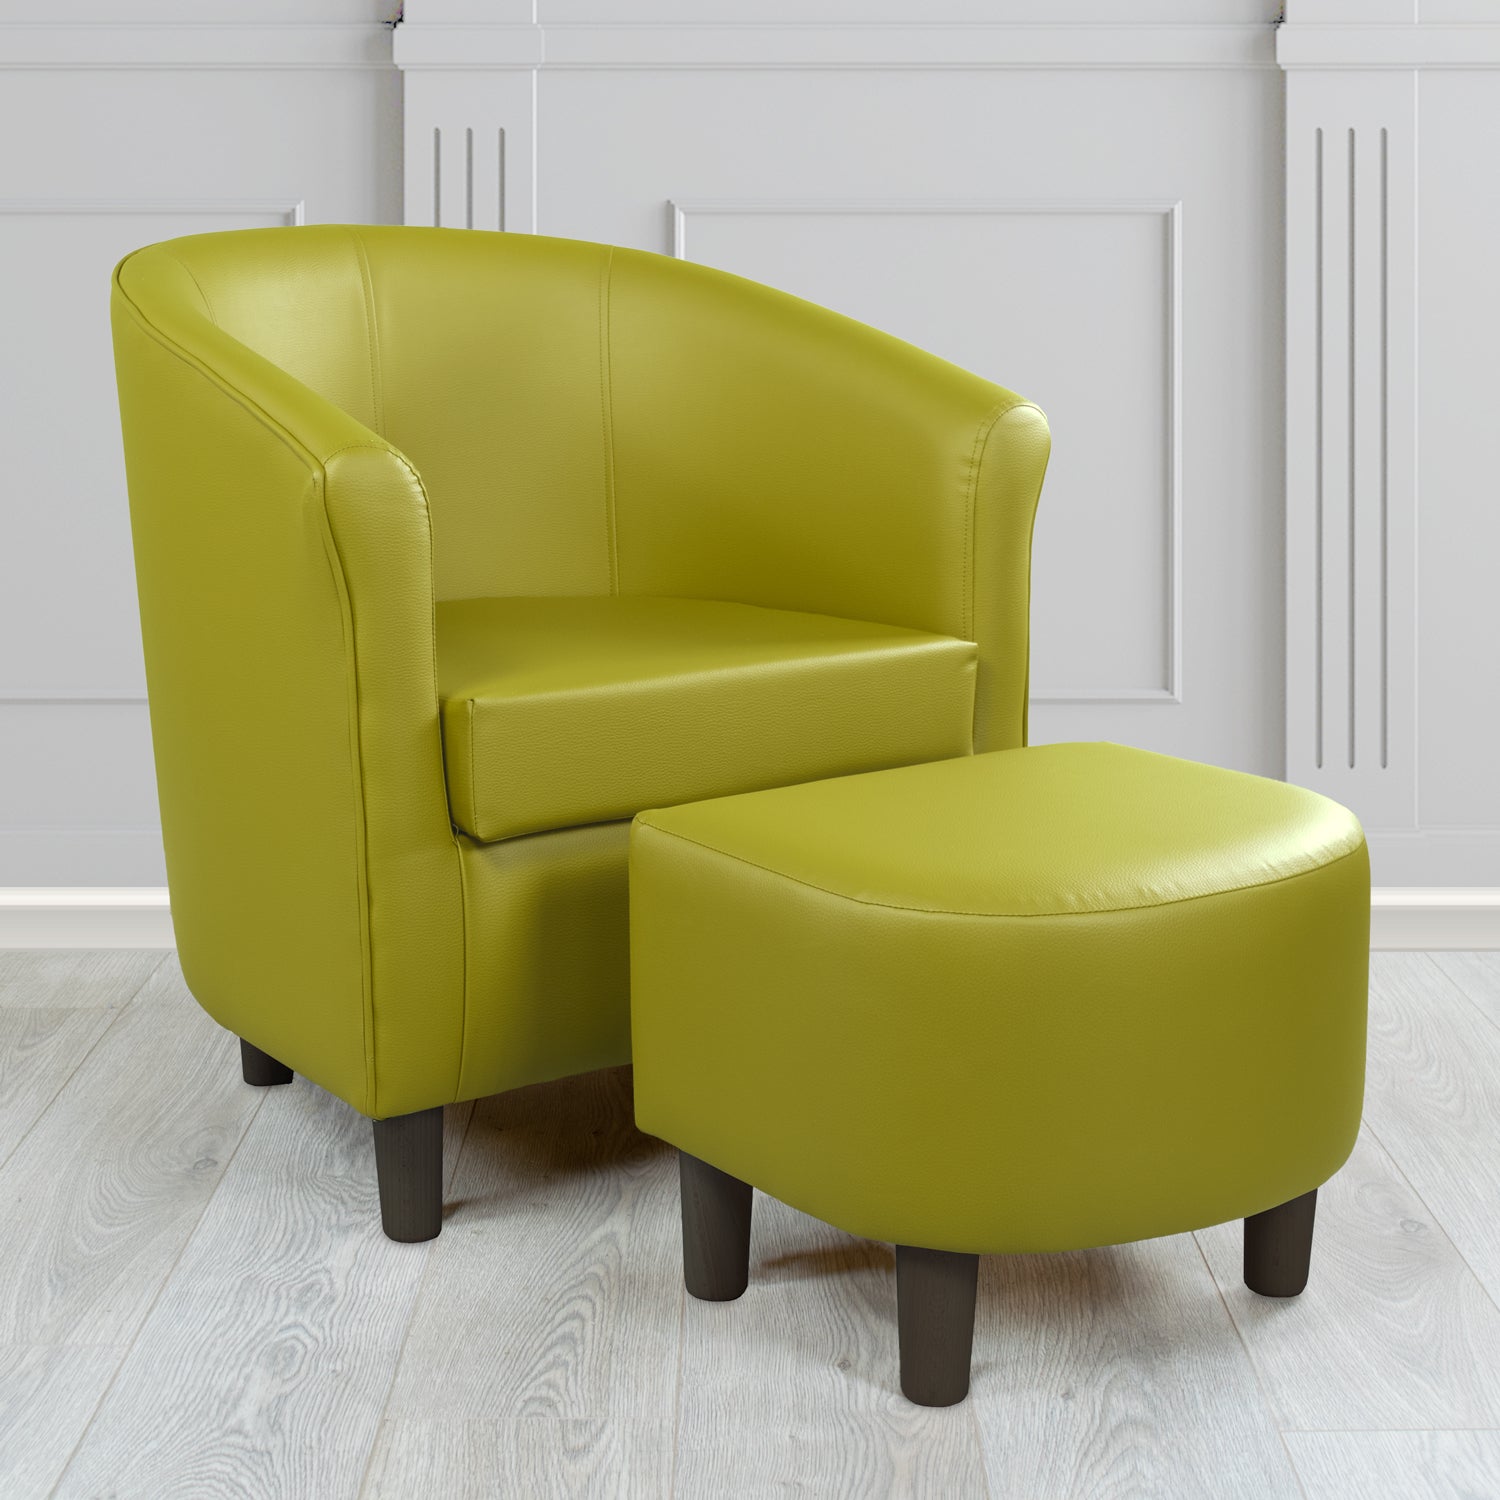 Tuscany Just Colour Dijon Faux Leather Tub Chair with Dee Footstool Set - The Tub Chair Shop